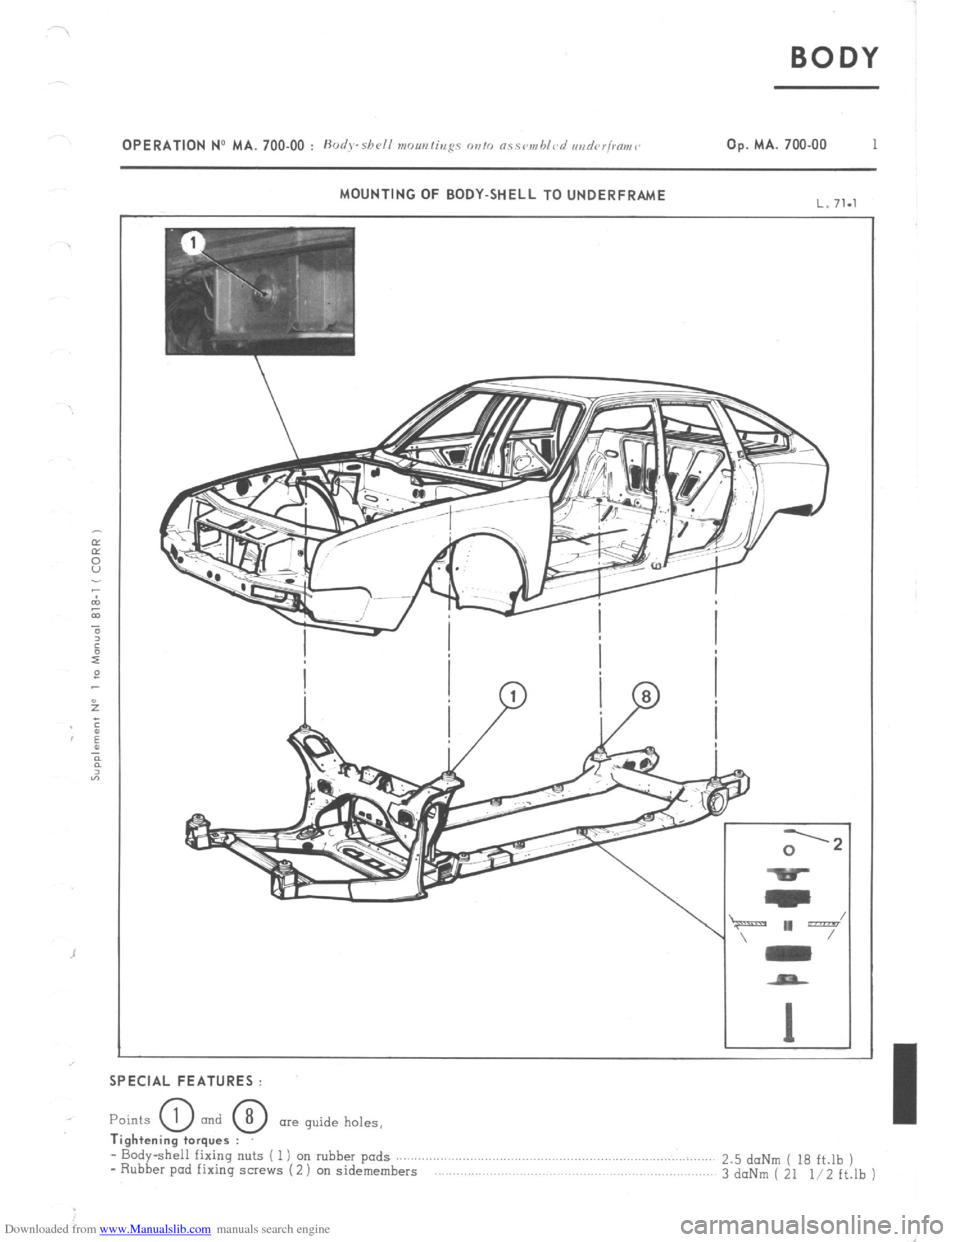 Citroen CX 1981 1.G Service Manual Downloaded from www.Manualslib.com manuals search engine BODY 
OPERATION No MA. 700.00 : Hods-shell nrountirrgs OVIO n\sov,hlcd uud<~r/m,<. Op. MA. 700.00 1 
MOUNTING OF BODY-SHELL TO UNDERFRAME 
L. 7